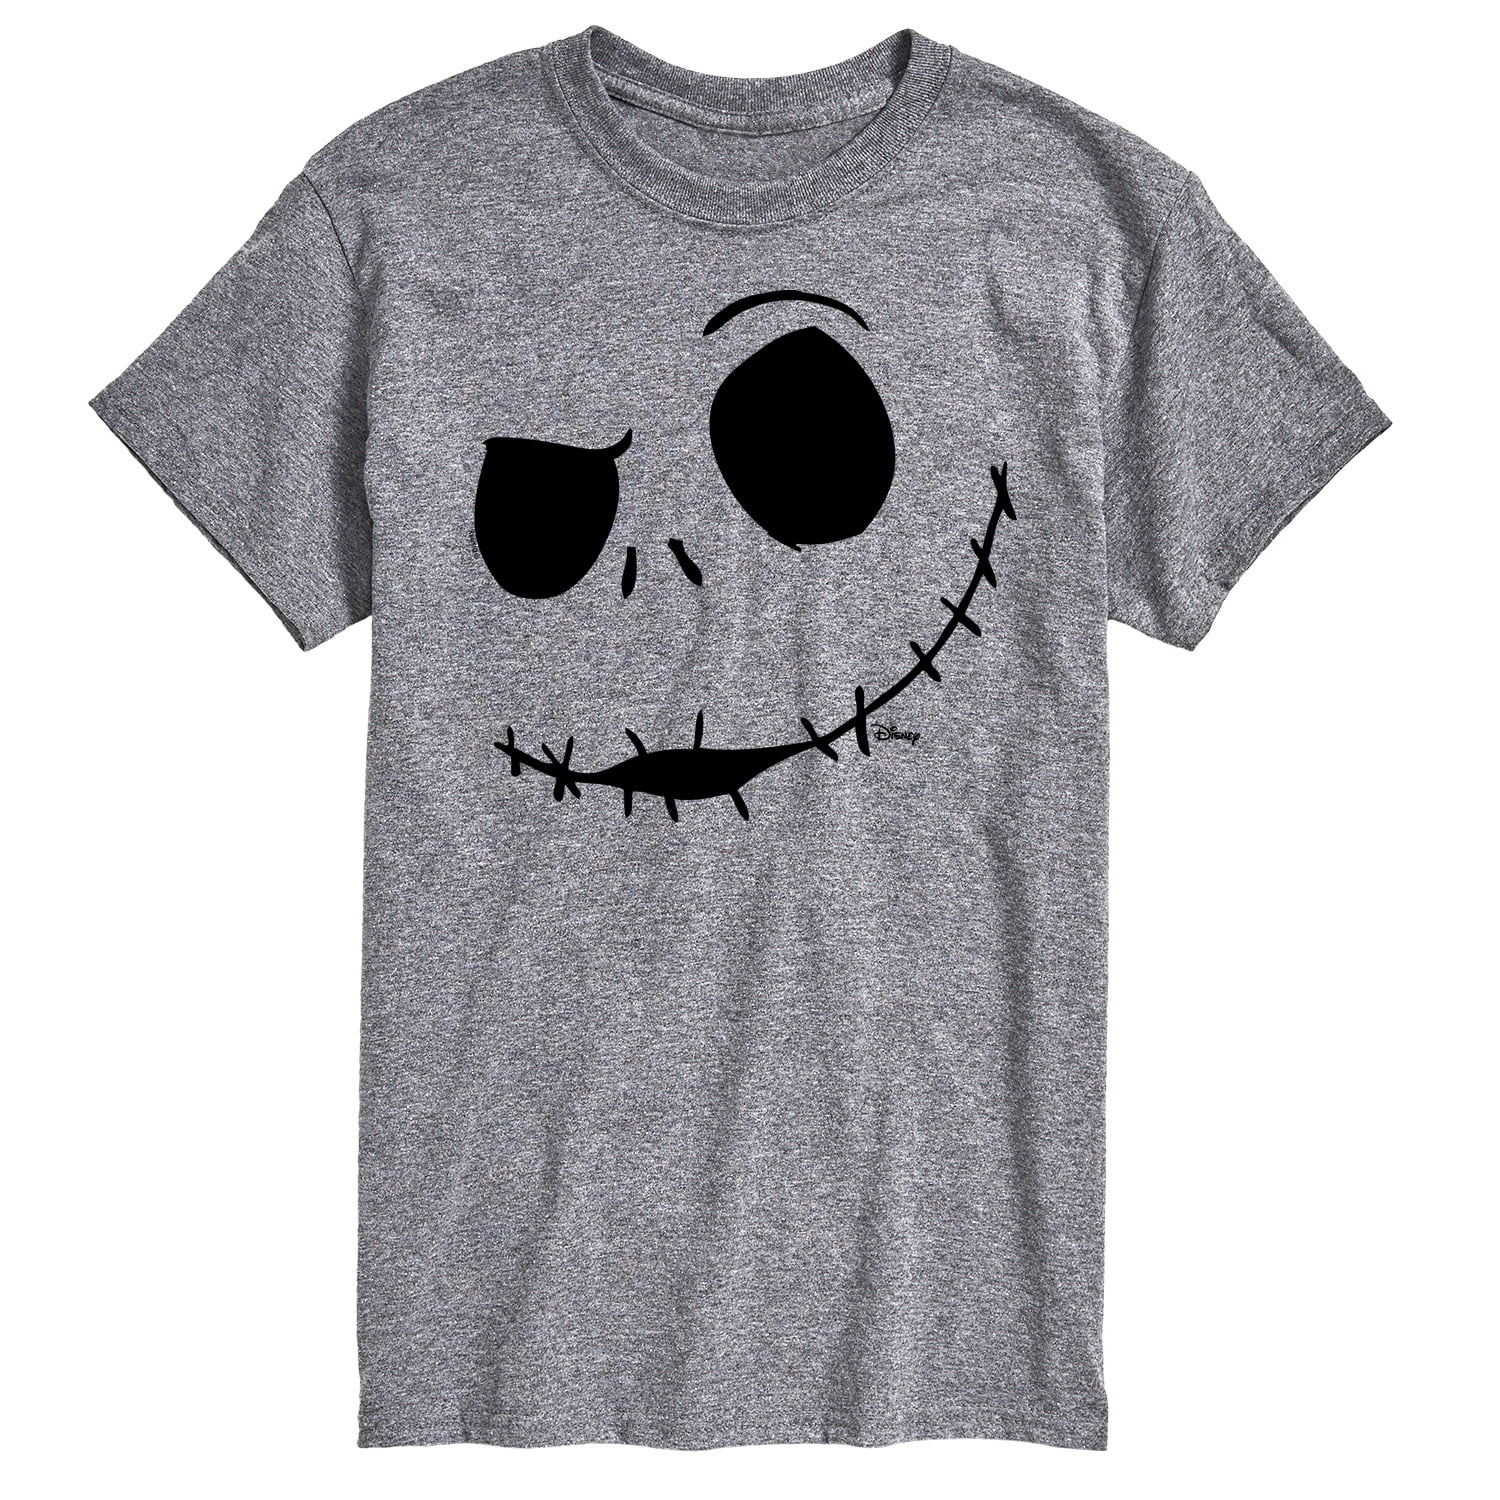 Men's The Nightmare Before Christmas Jack Skellington Face Graphic Tee  Black X Large